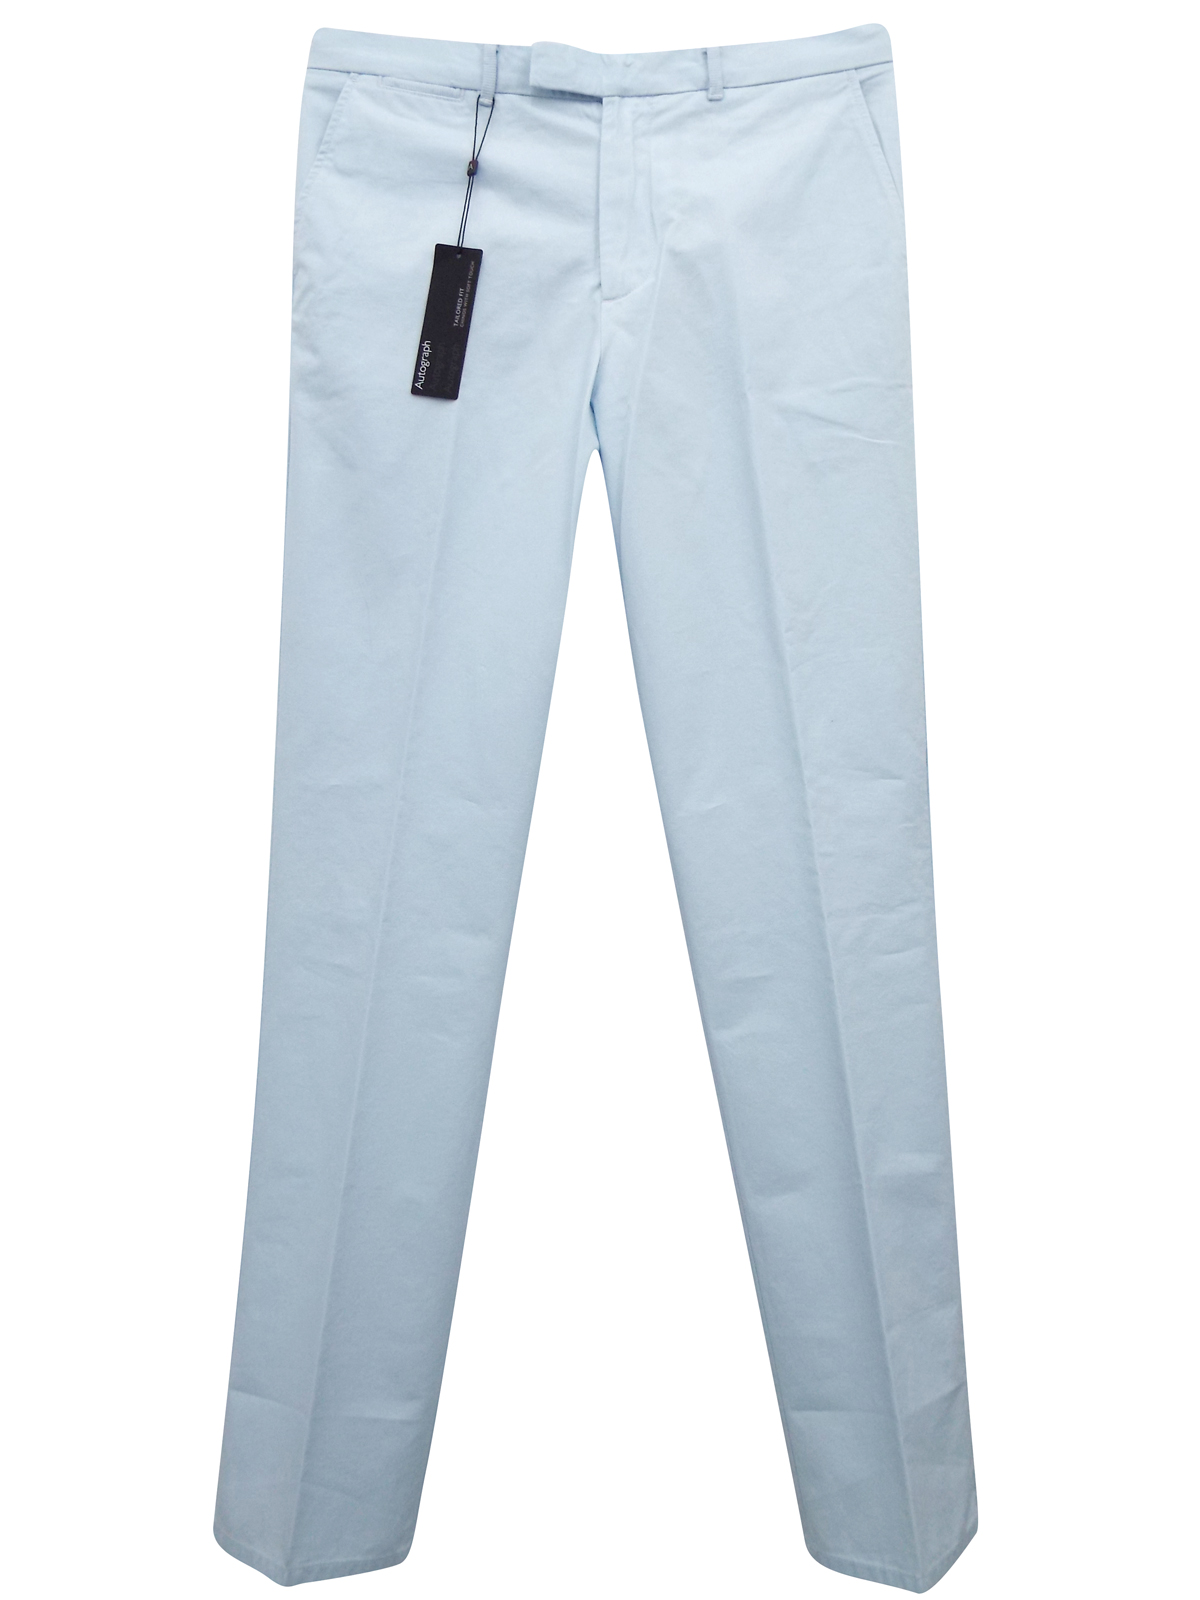 Marks and Spencer - - M&5 LIGHT-BLUE Pure Cotton Soft Touch Tailored Fit Chinos - Waist Size 32 